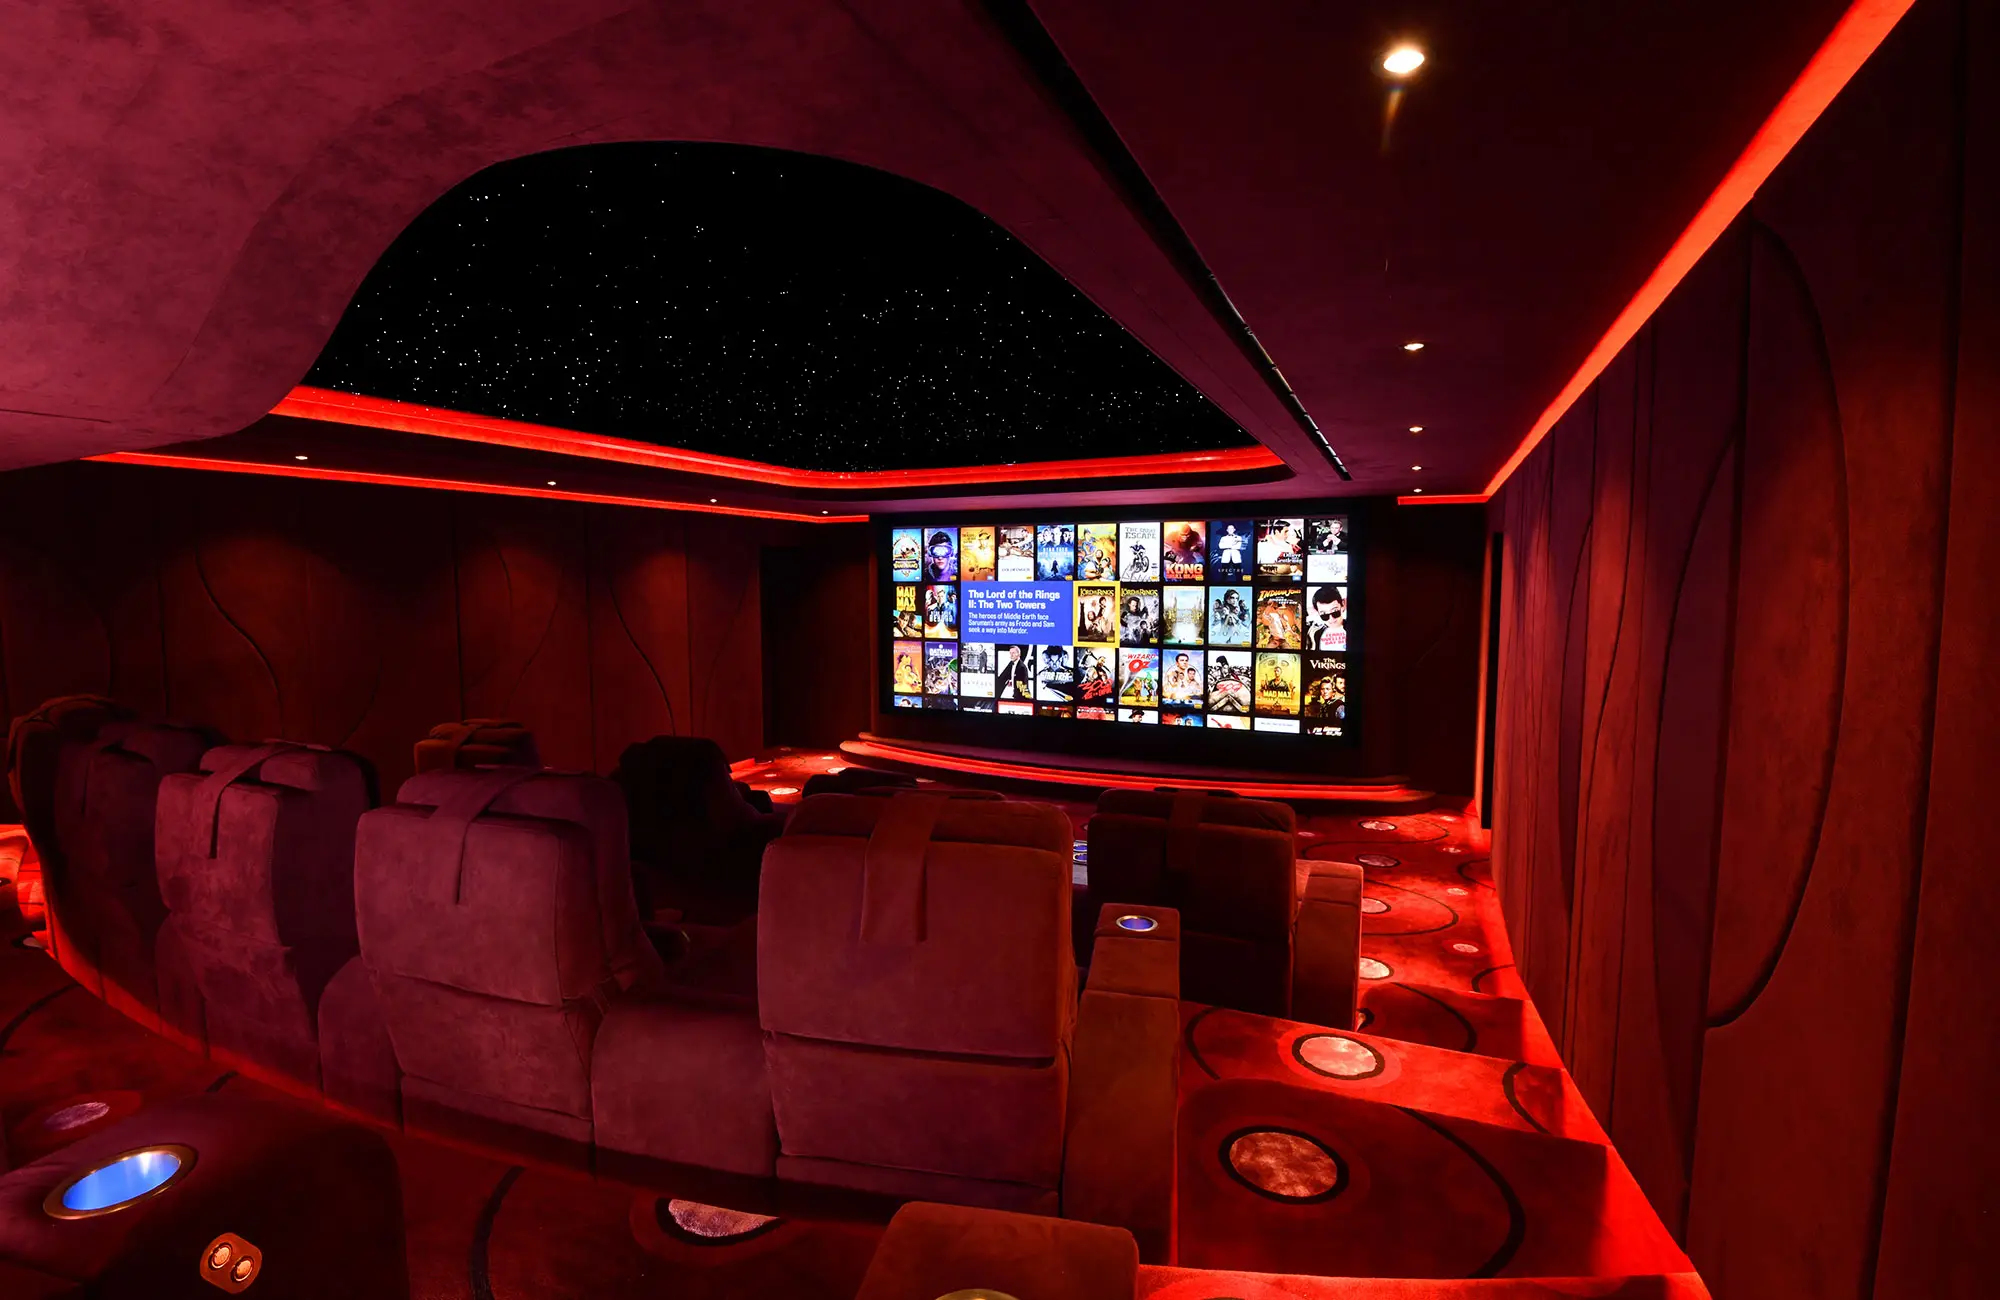 High Quality Bespoke Home Cinema Rooms in London